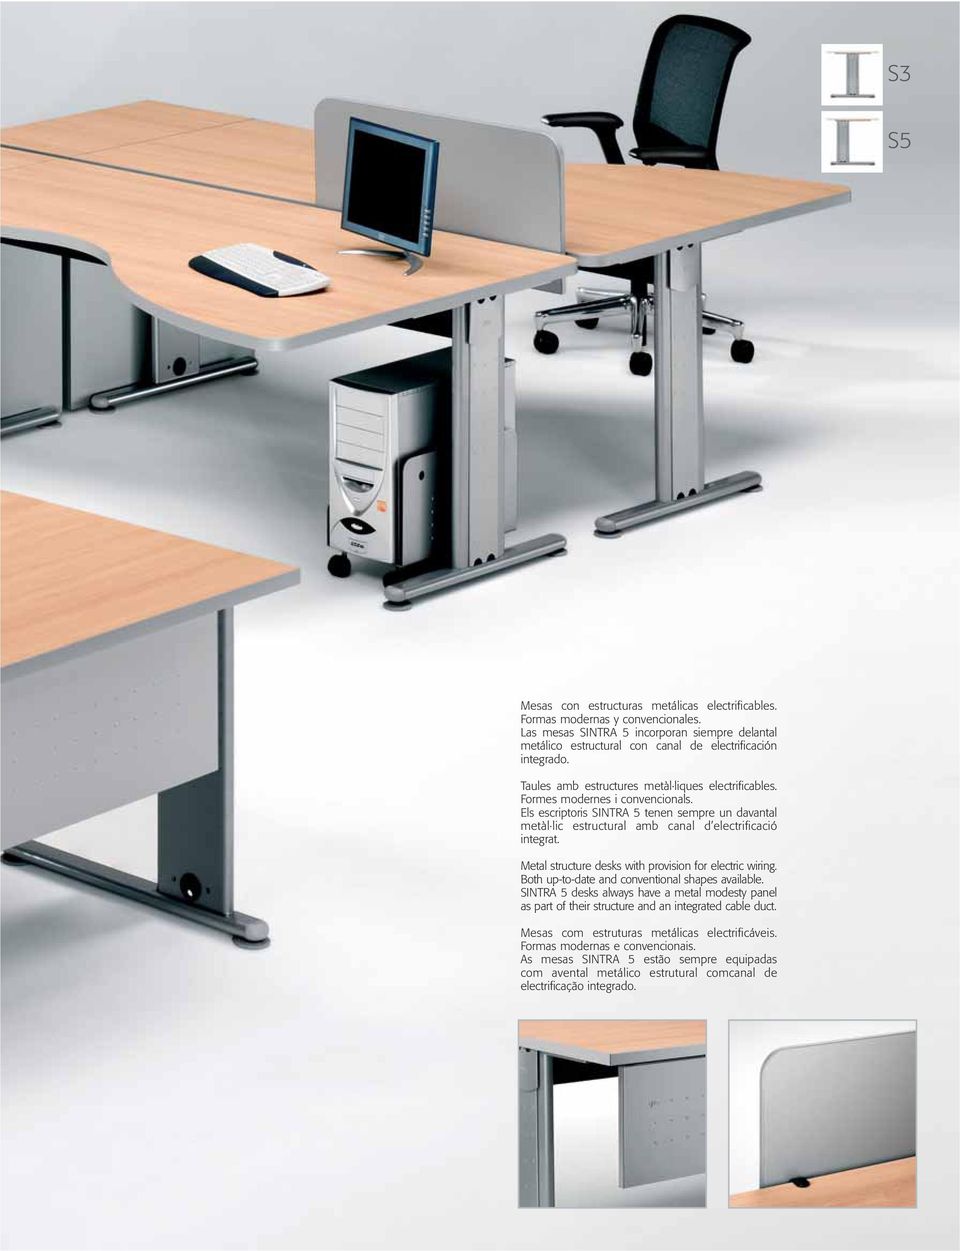 Metal structure desks with provision for electric wiring. Both up-to-date and conventional shapes available.